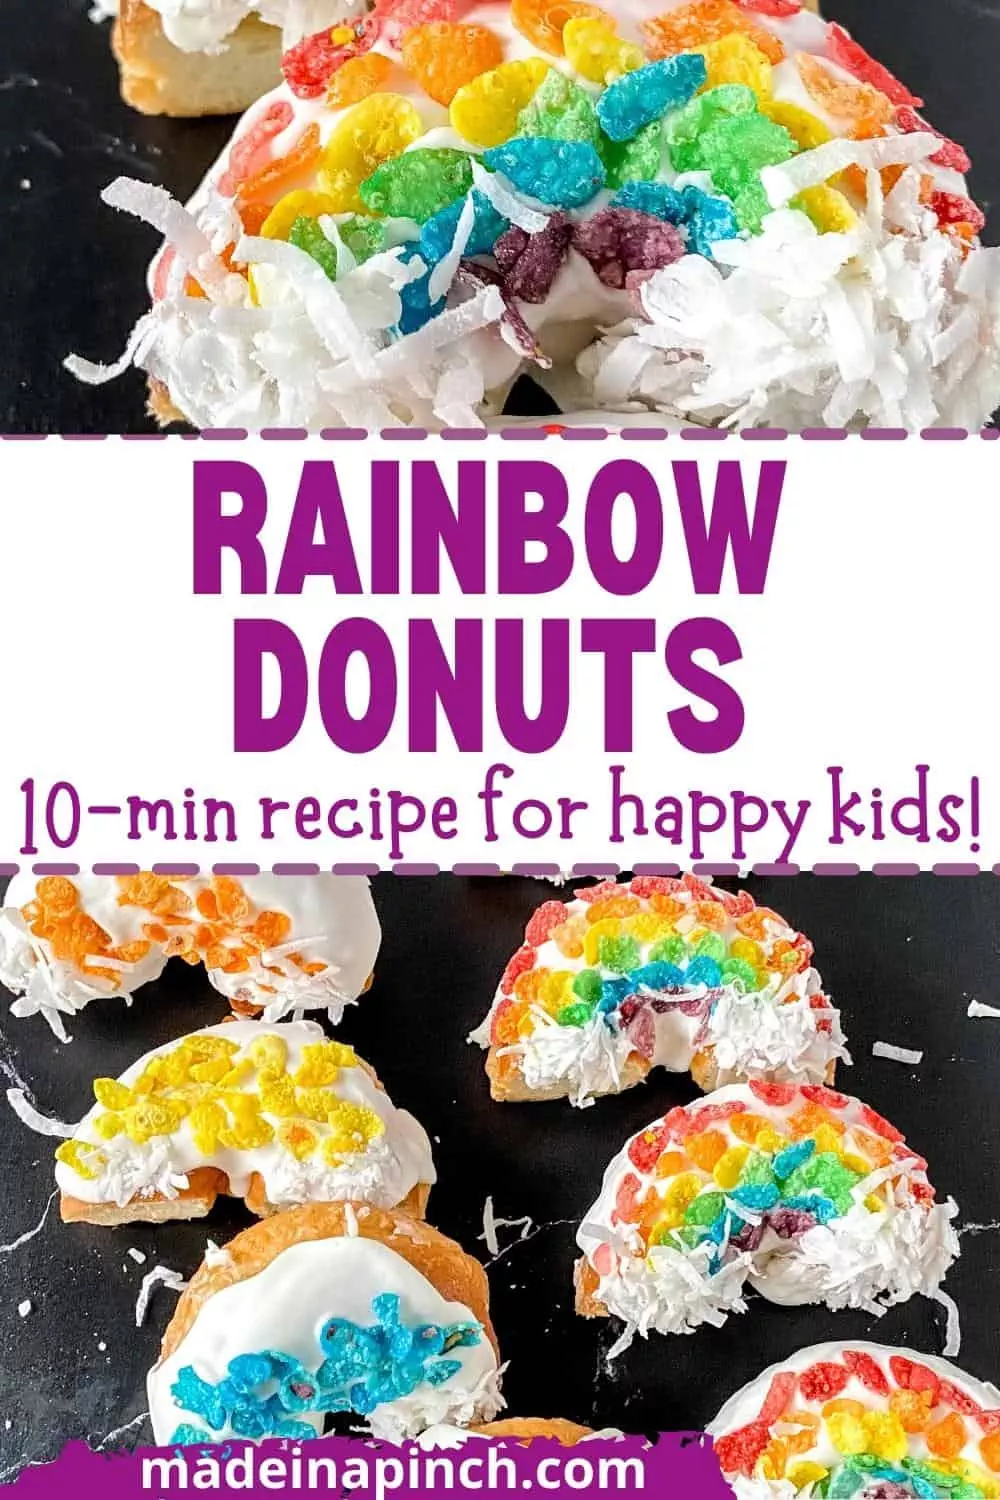 A deliciously fun and quick activity - and TREAT! These rainbow donuts are insanely quick to make, perfect for any day you want a little sunshine in your life or St. Patrick